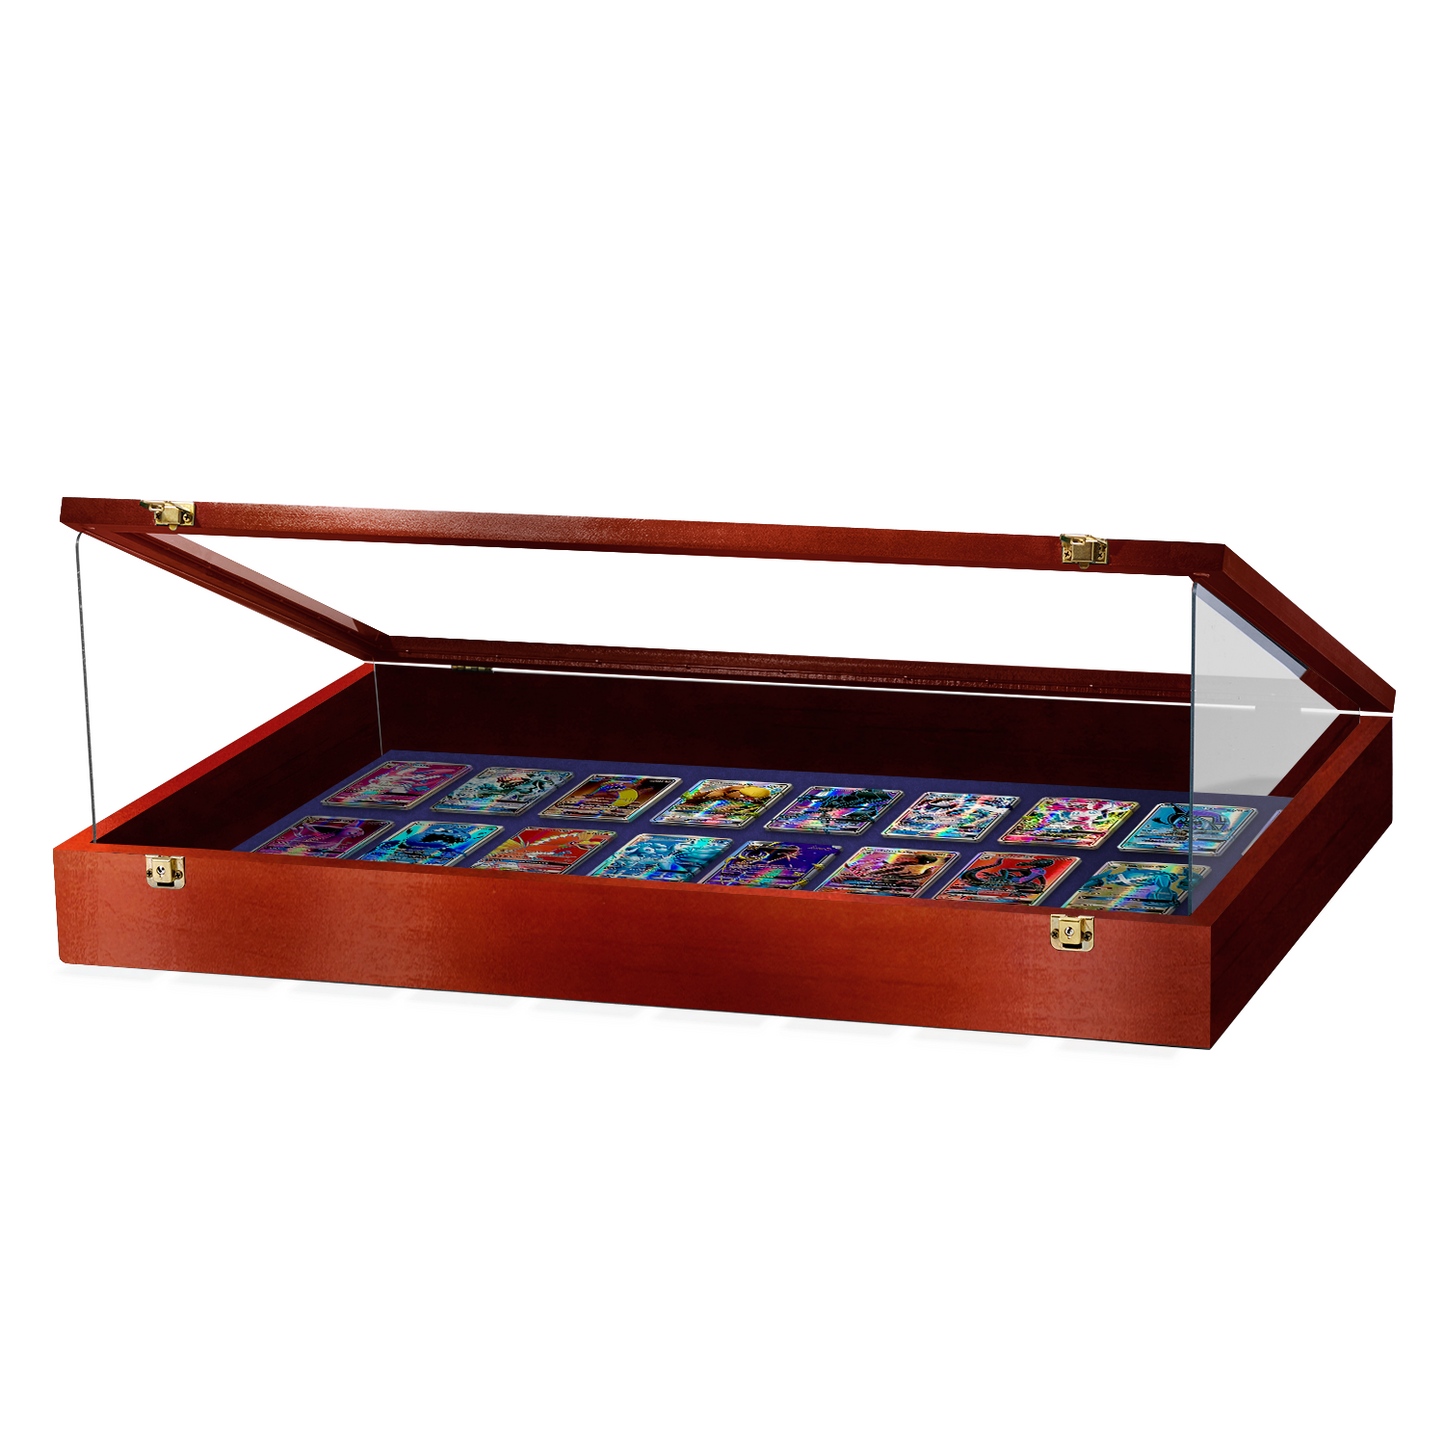 Trade Show Display Case Portable - w/ Acrylic Side Guards